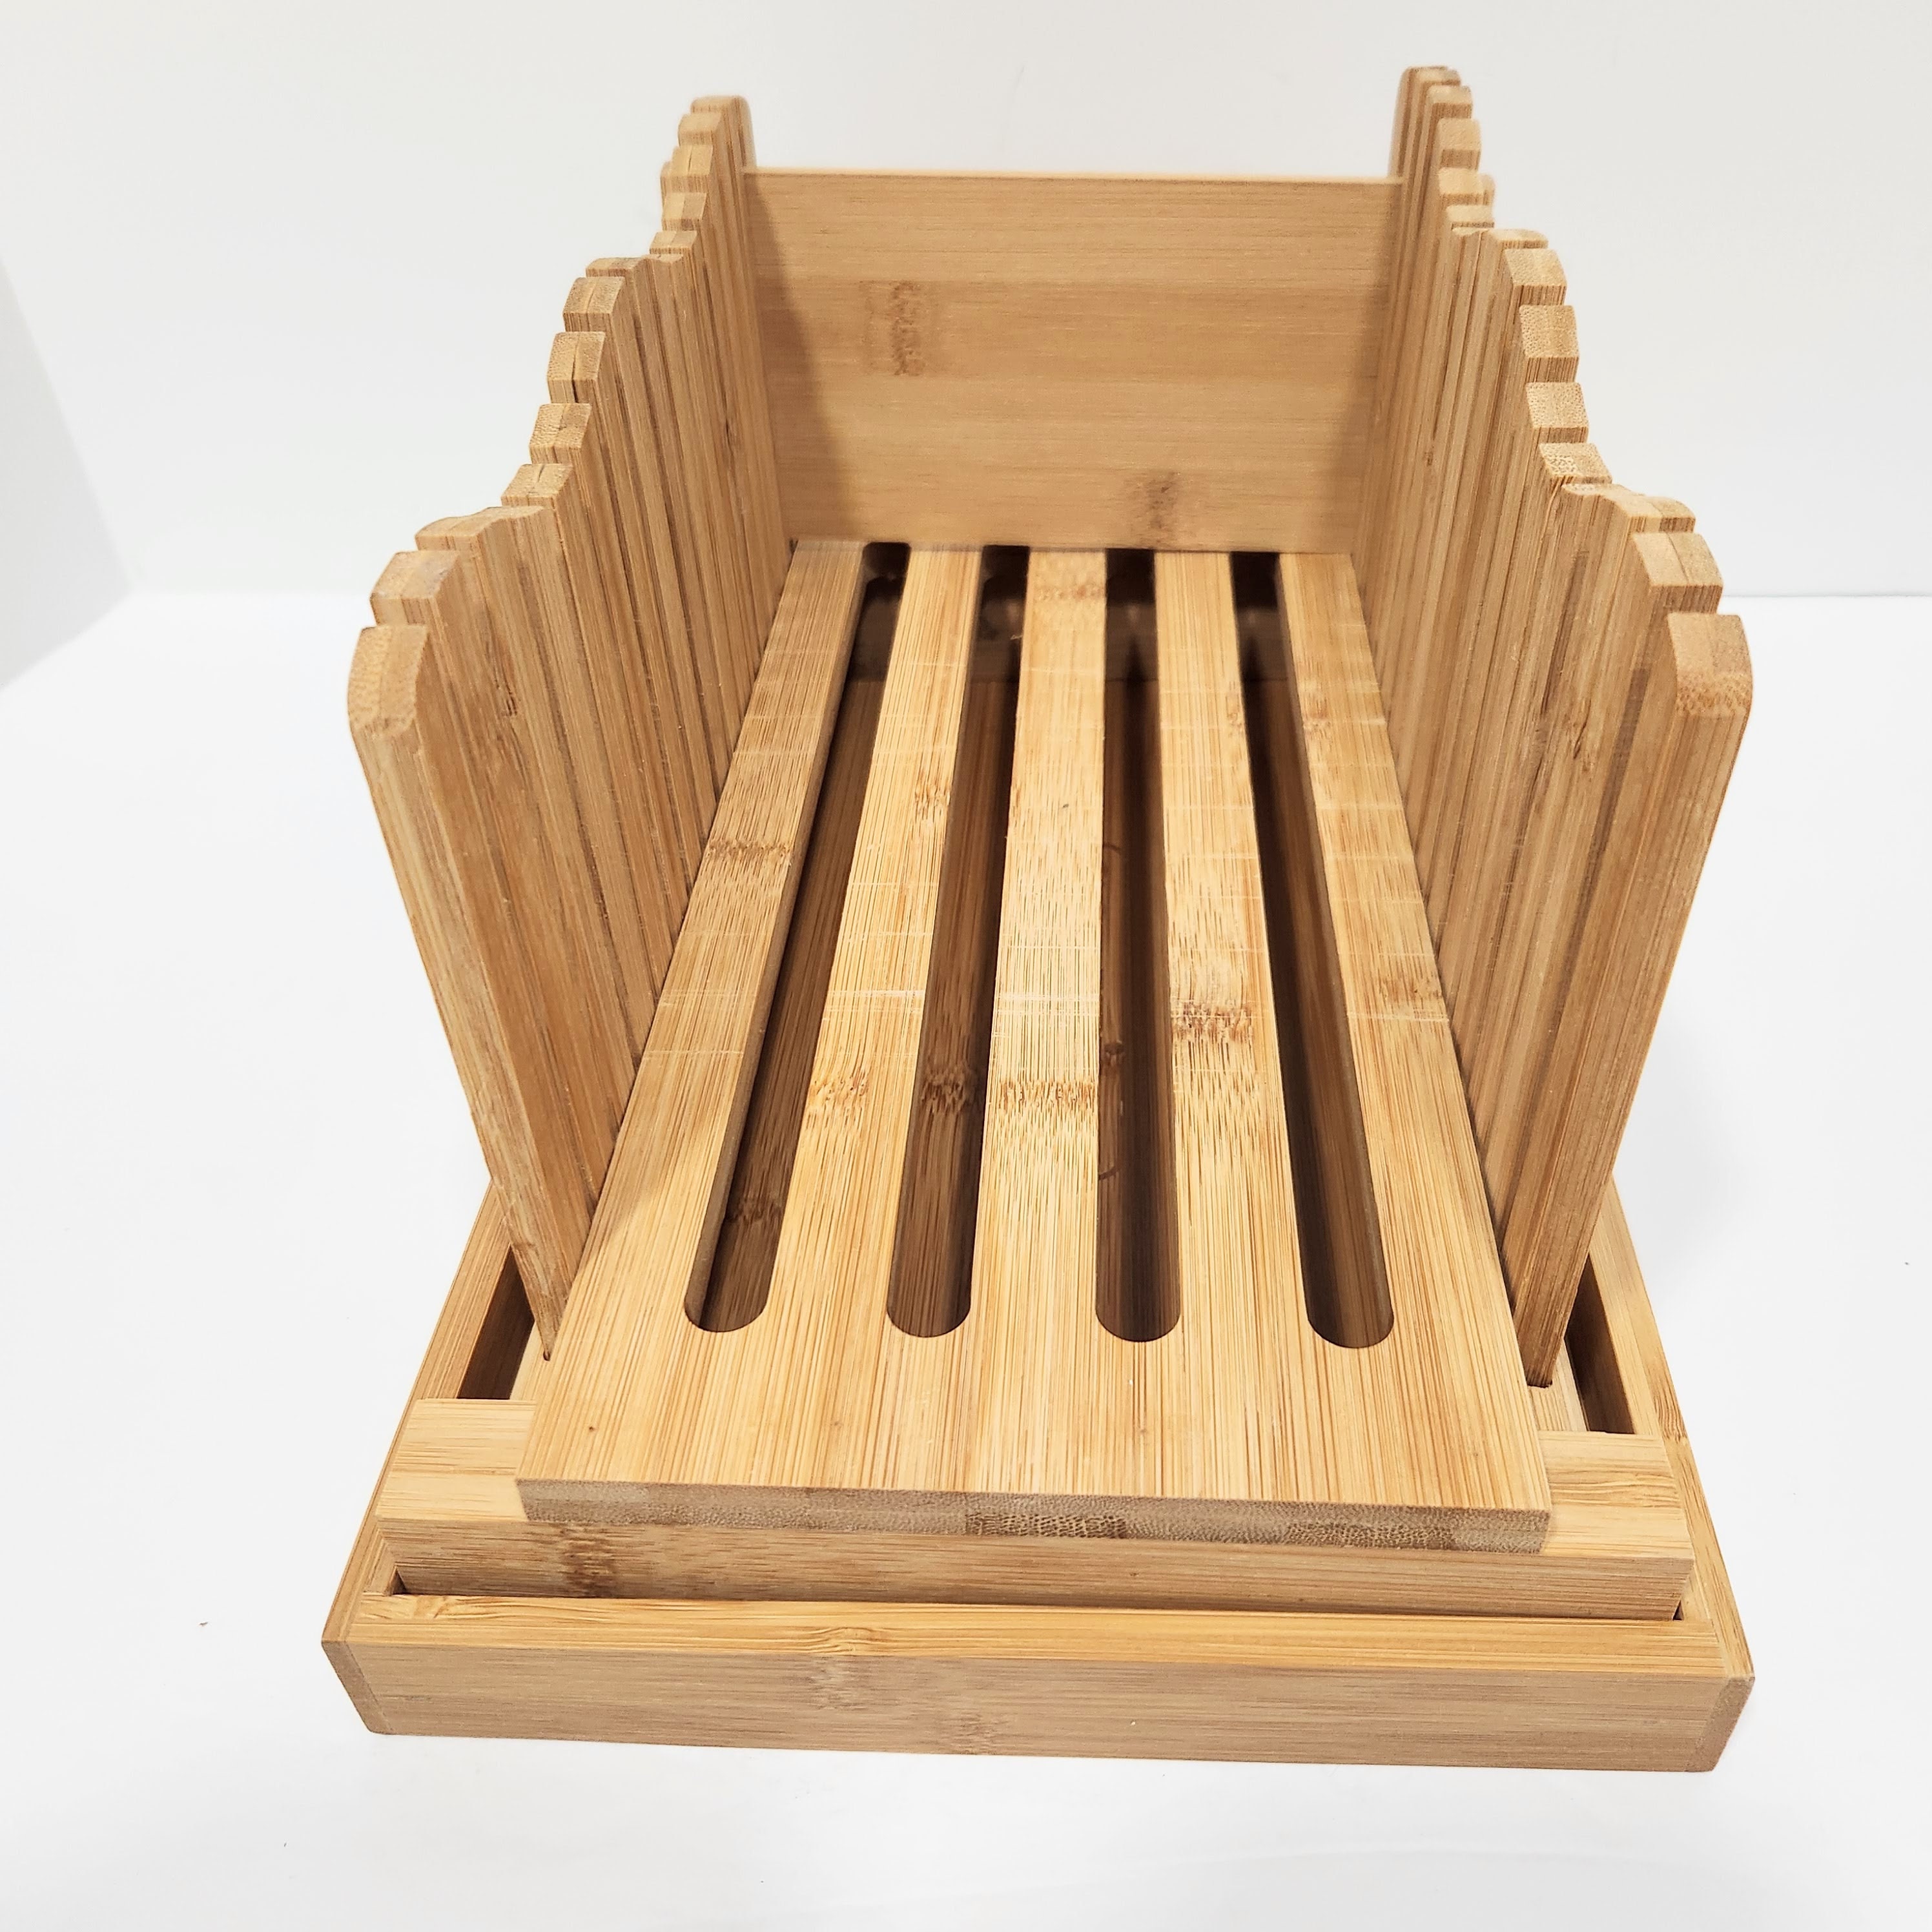 Foldable Bamboo Bread Slicer with Crumb Tray Bamboo Bread Cutter